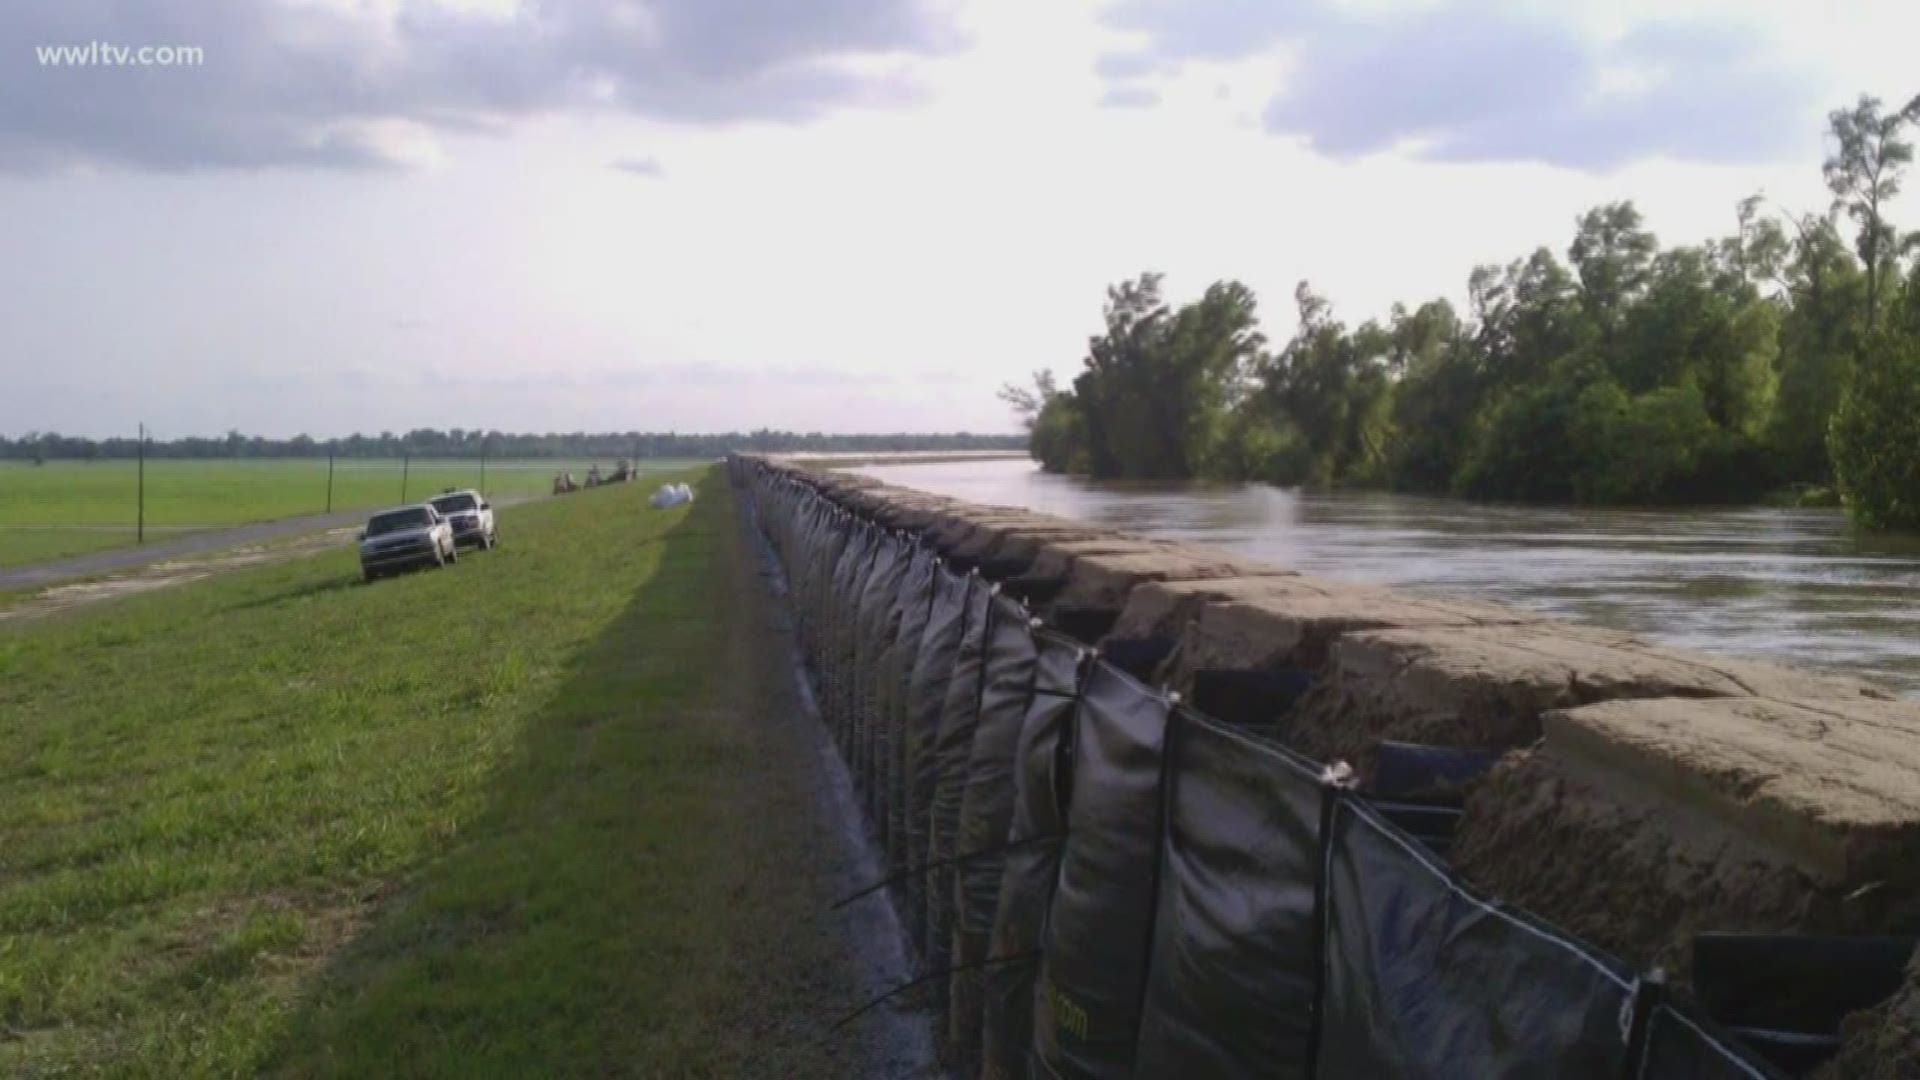 The DOTD initially installed portable water-filled dams to hold back rising water from tributaries coming off the Mississippi and Atchafalaya rivers.